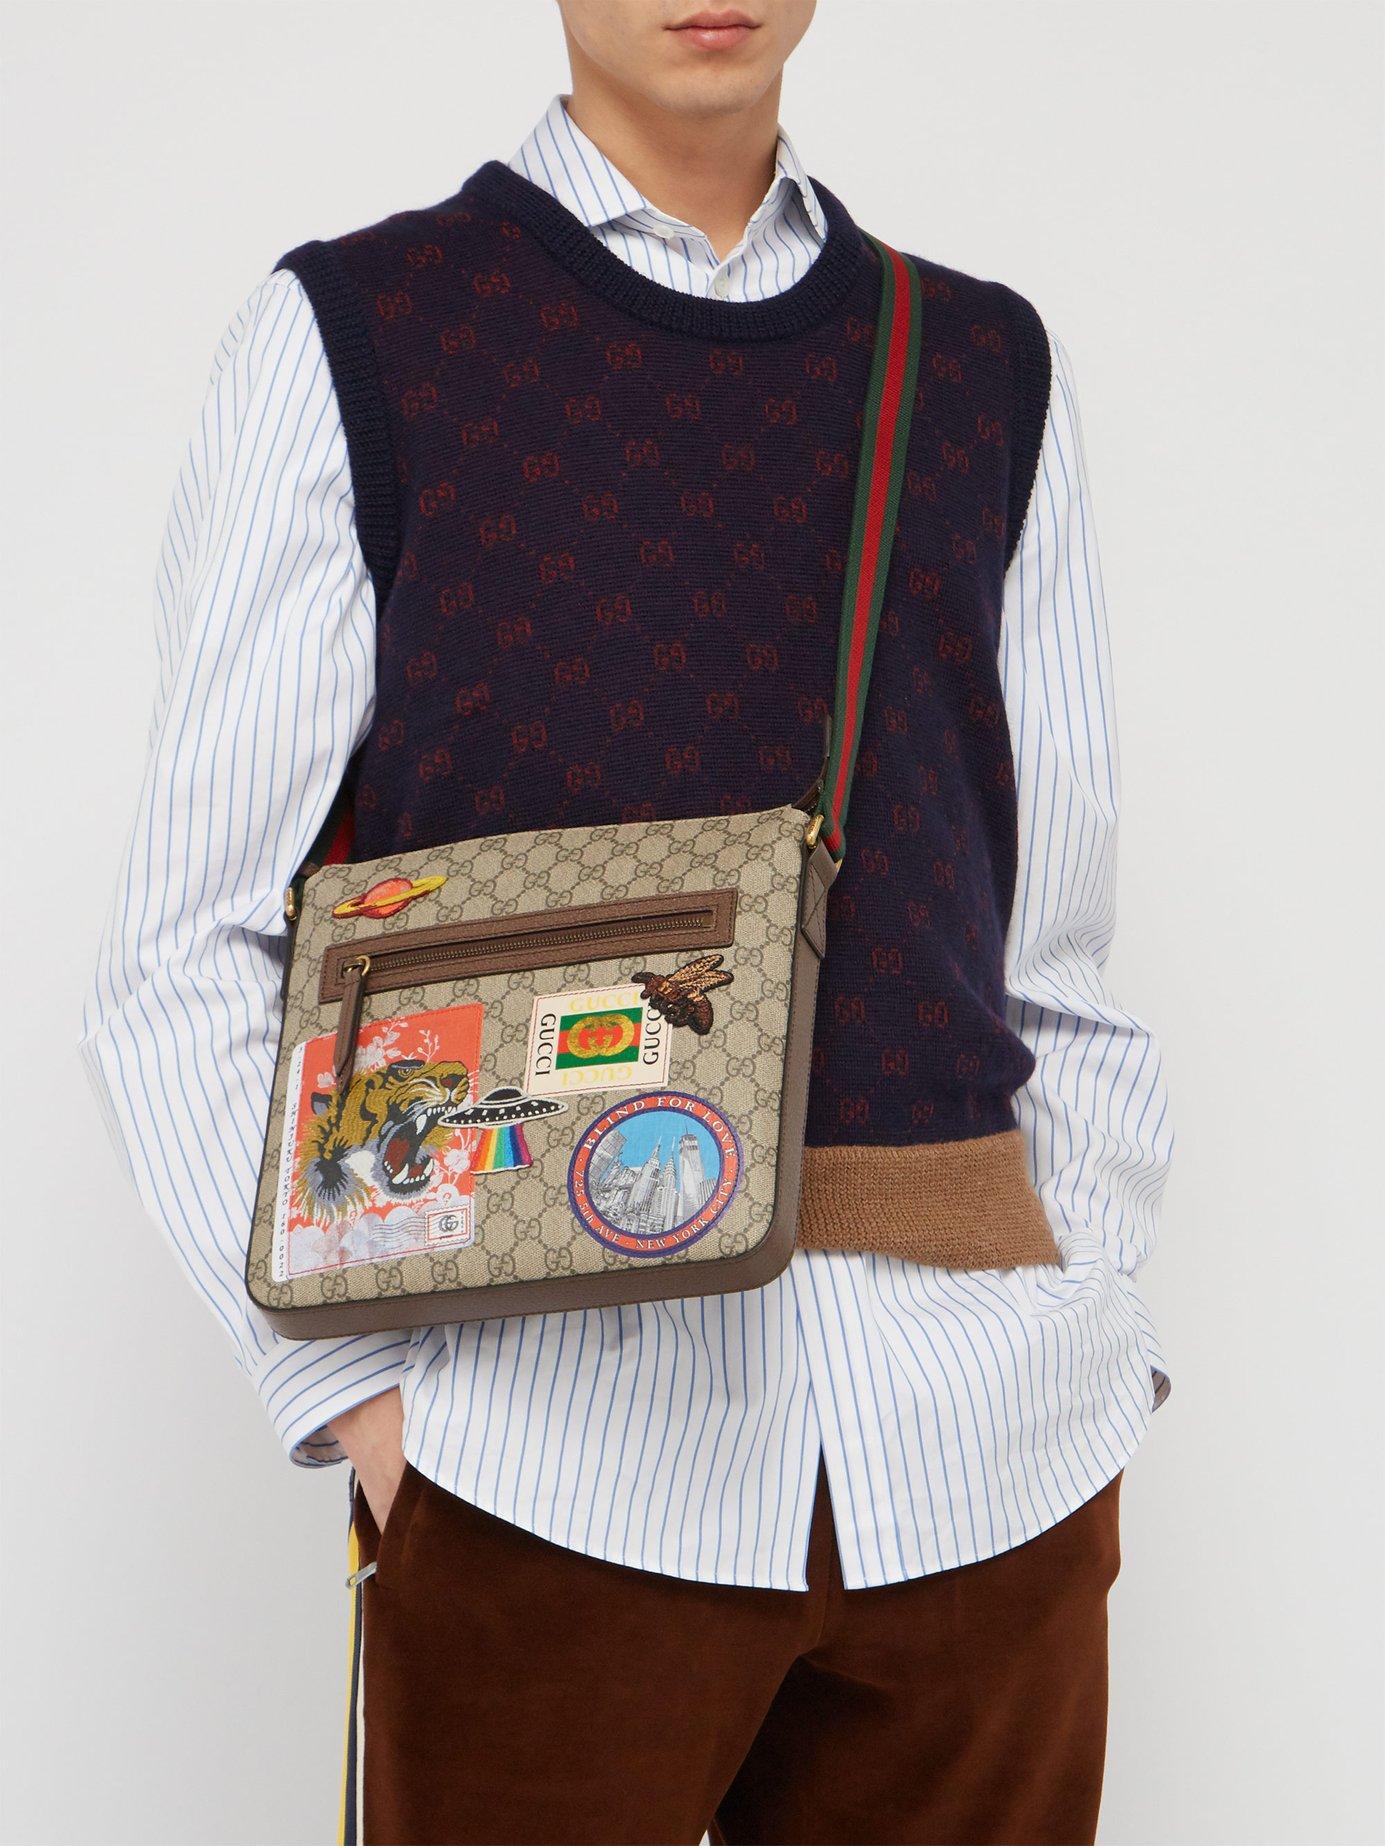 gucci bag with patches